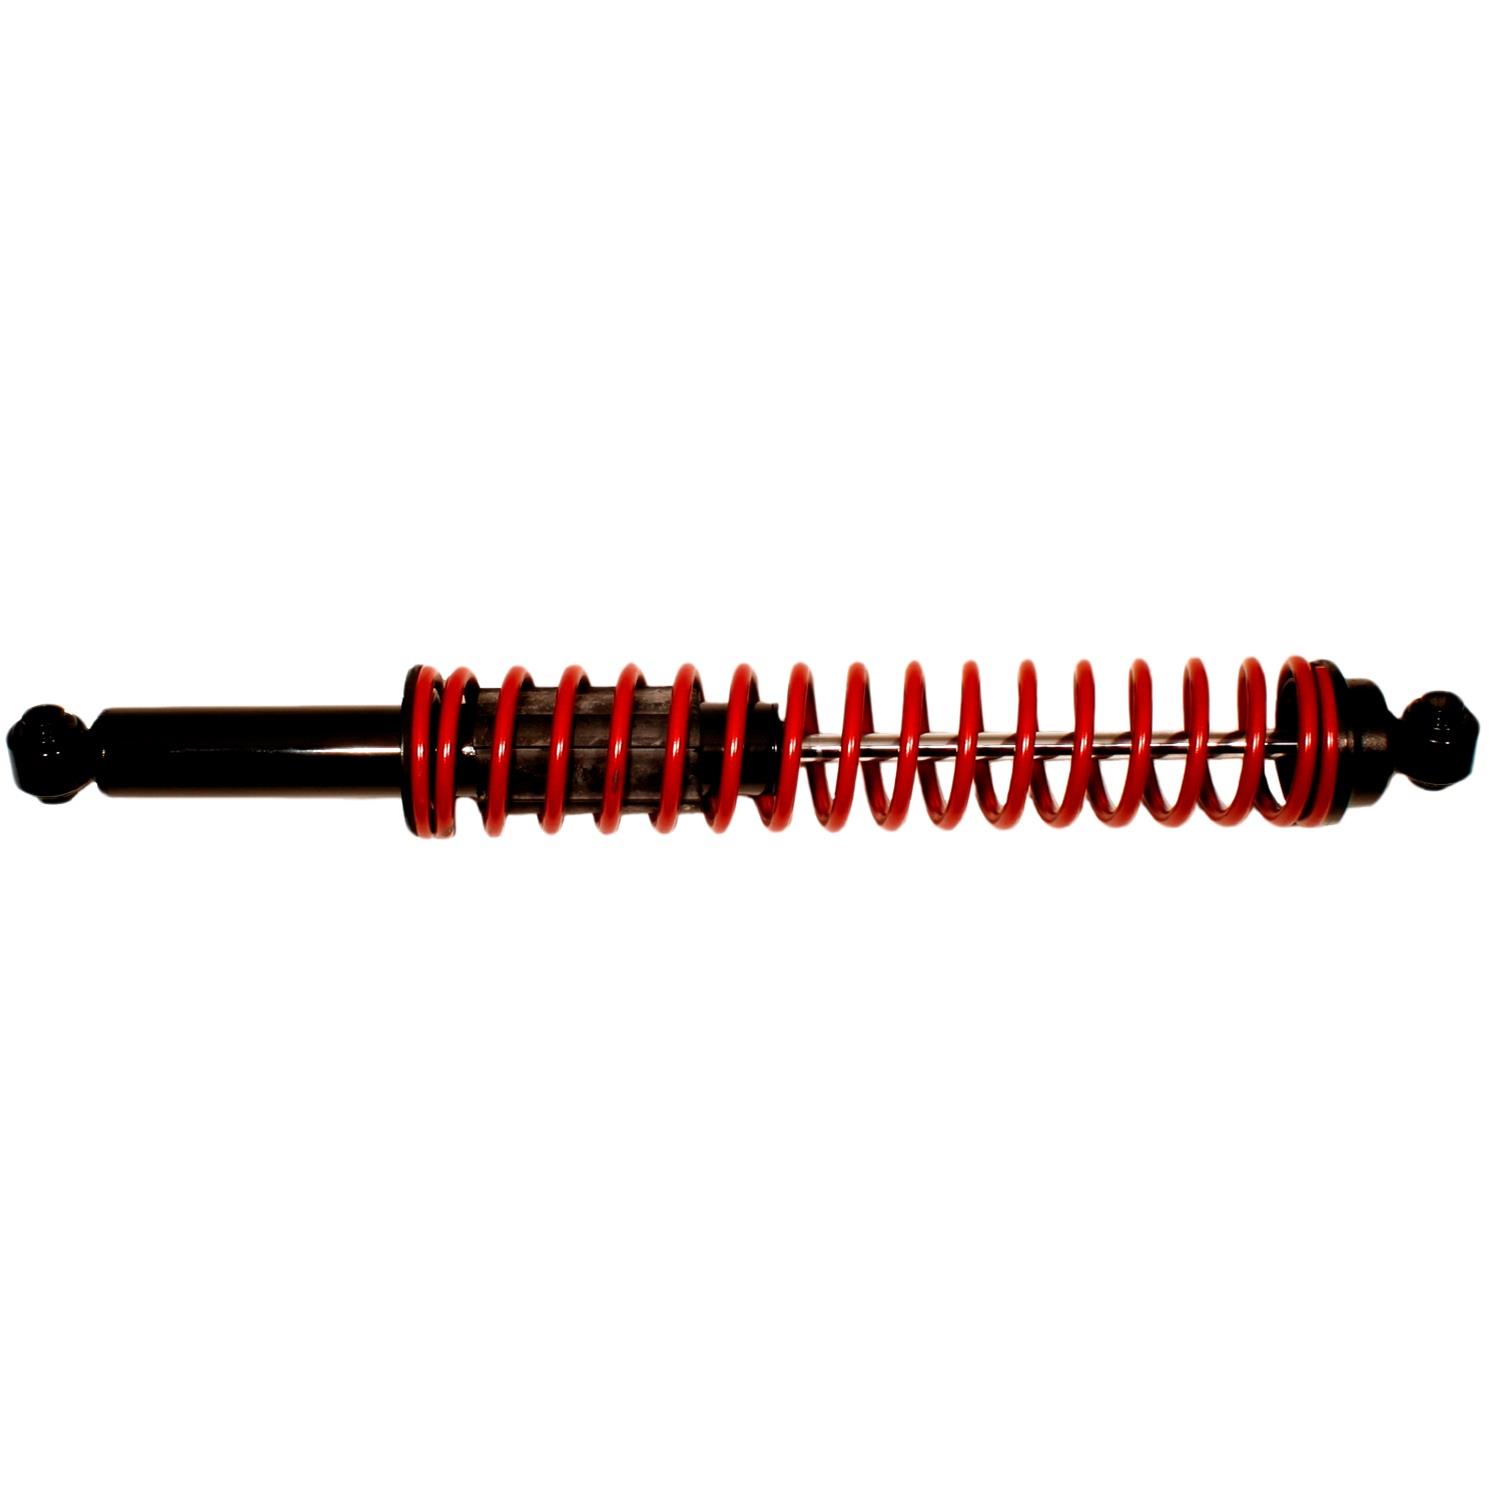 ACDelco 519-2 Specialty Spring Assisted Shock Absorber 